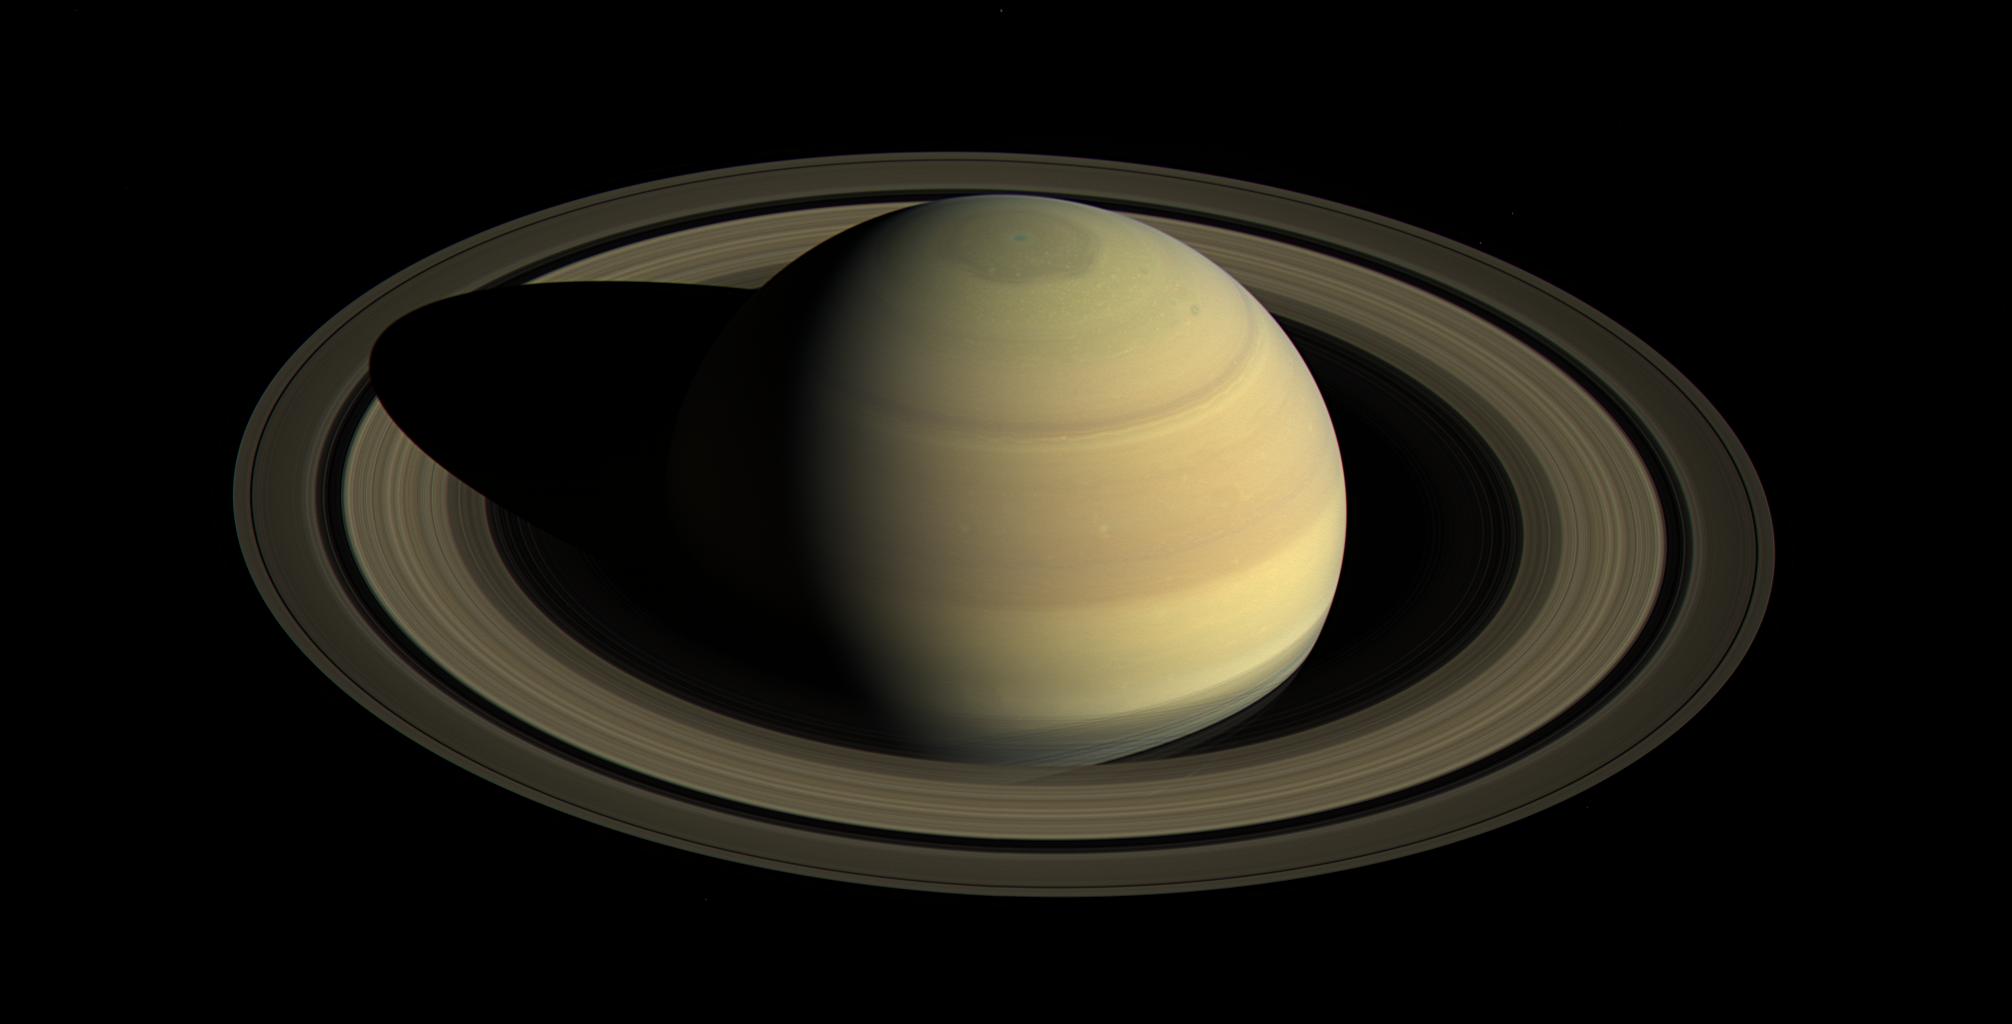 Cassini image of Saturn and its rings